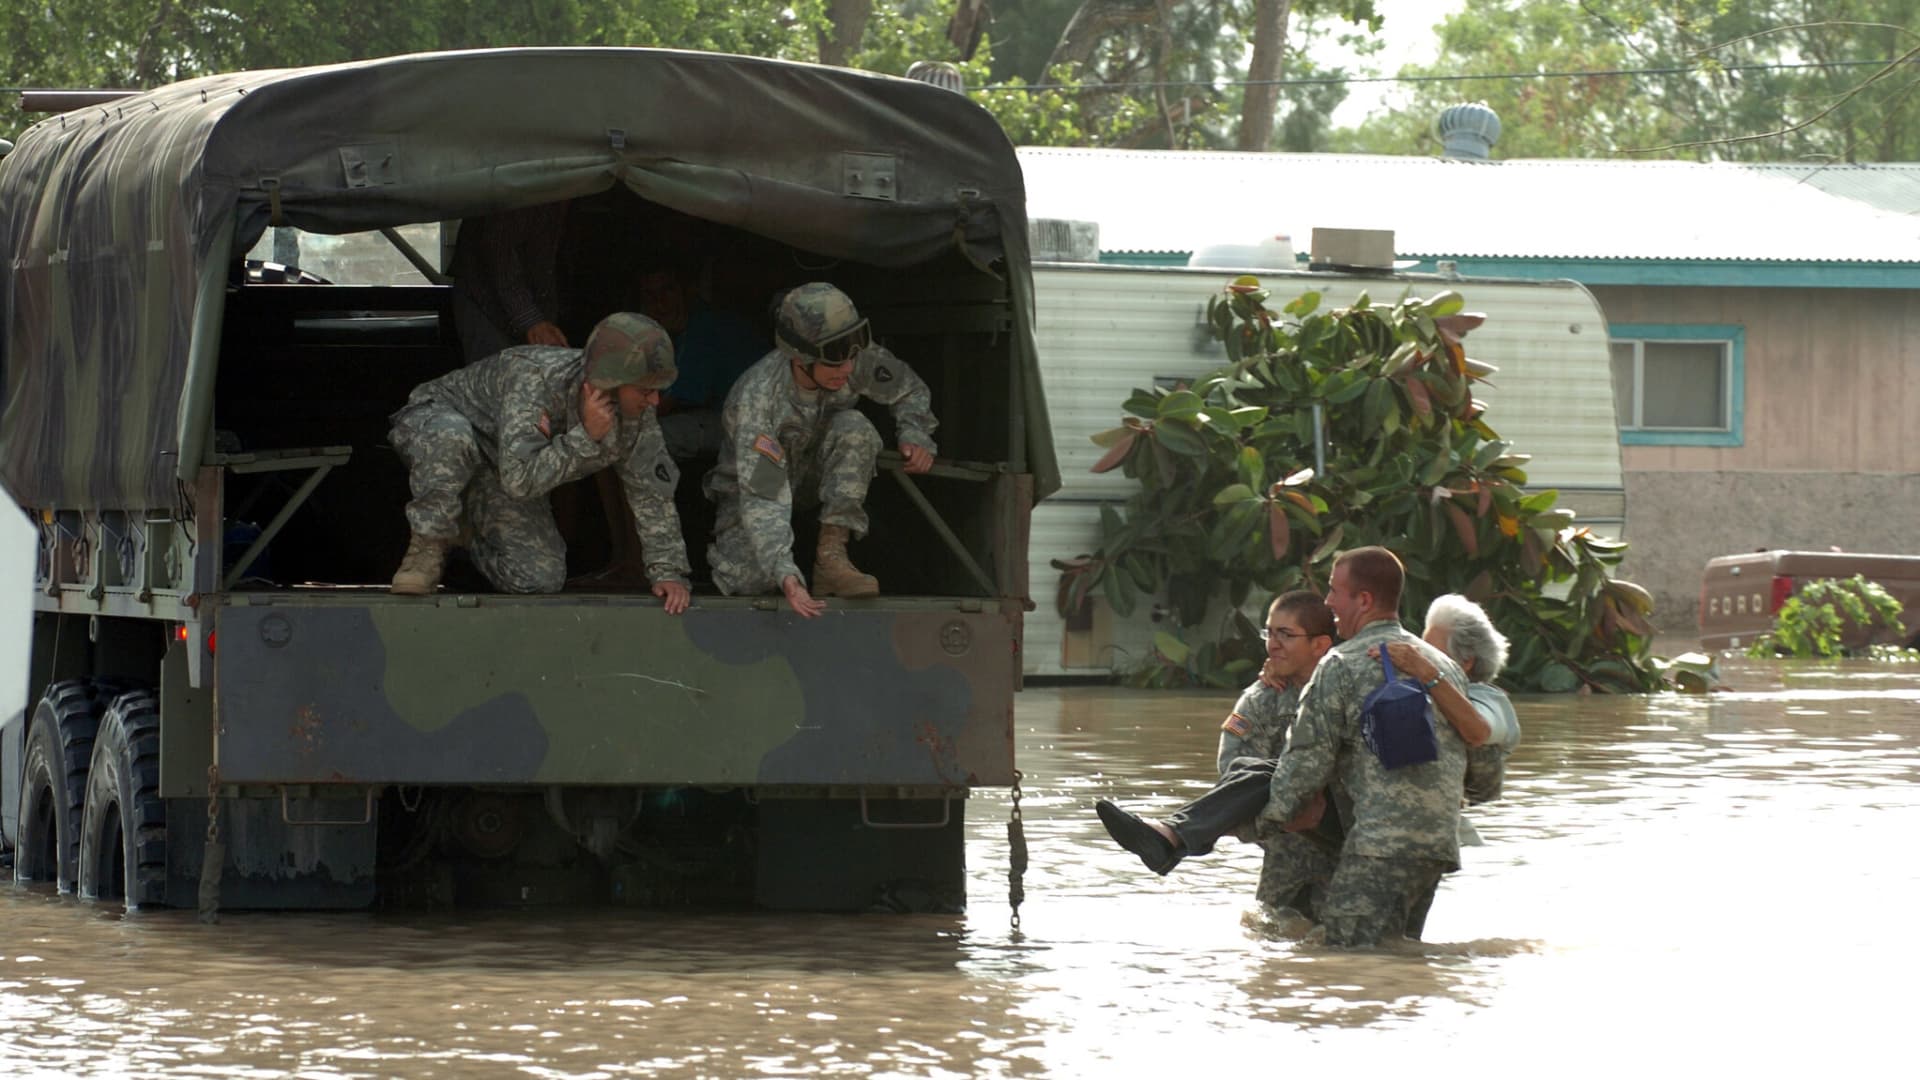 Texas National Guard Pvt. Mark Rivera of Co. A, 72nd Infantry Brigade, and Pvt. 1st Class Joseph Davora, Co. A, 1-41 Infantry Regiment, carry a woman stranded by flood waters to a waiting truck, where Pvt. John Paul Borrego and Pvt. 1st Class Christopher Culbelier, wait.